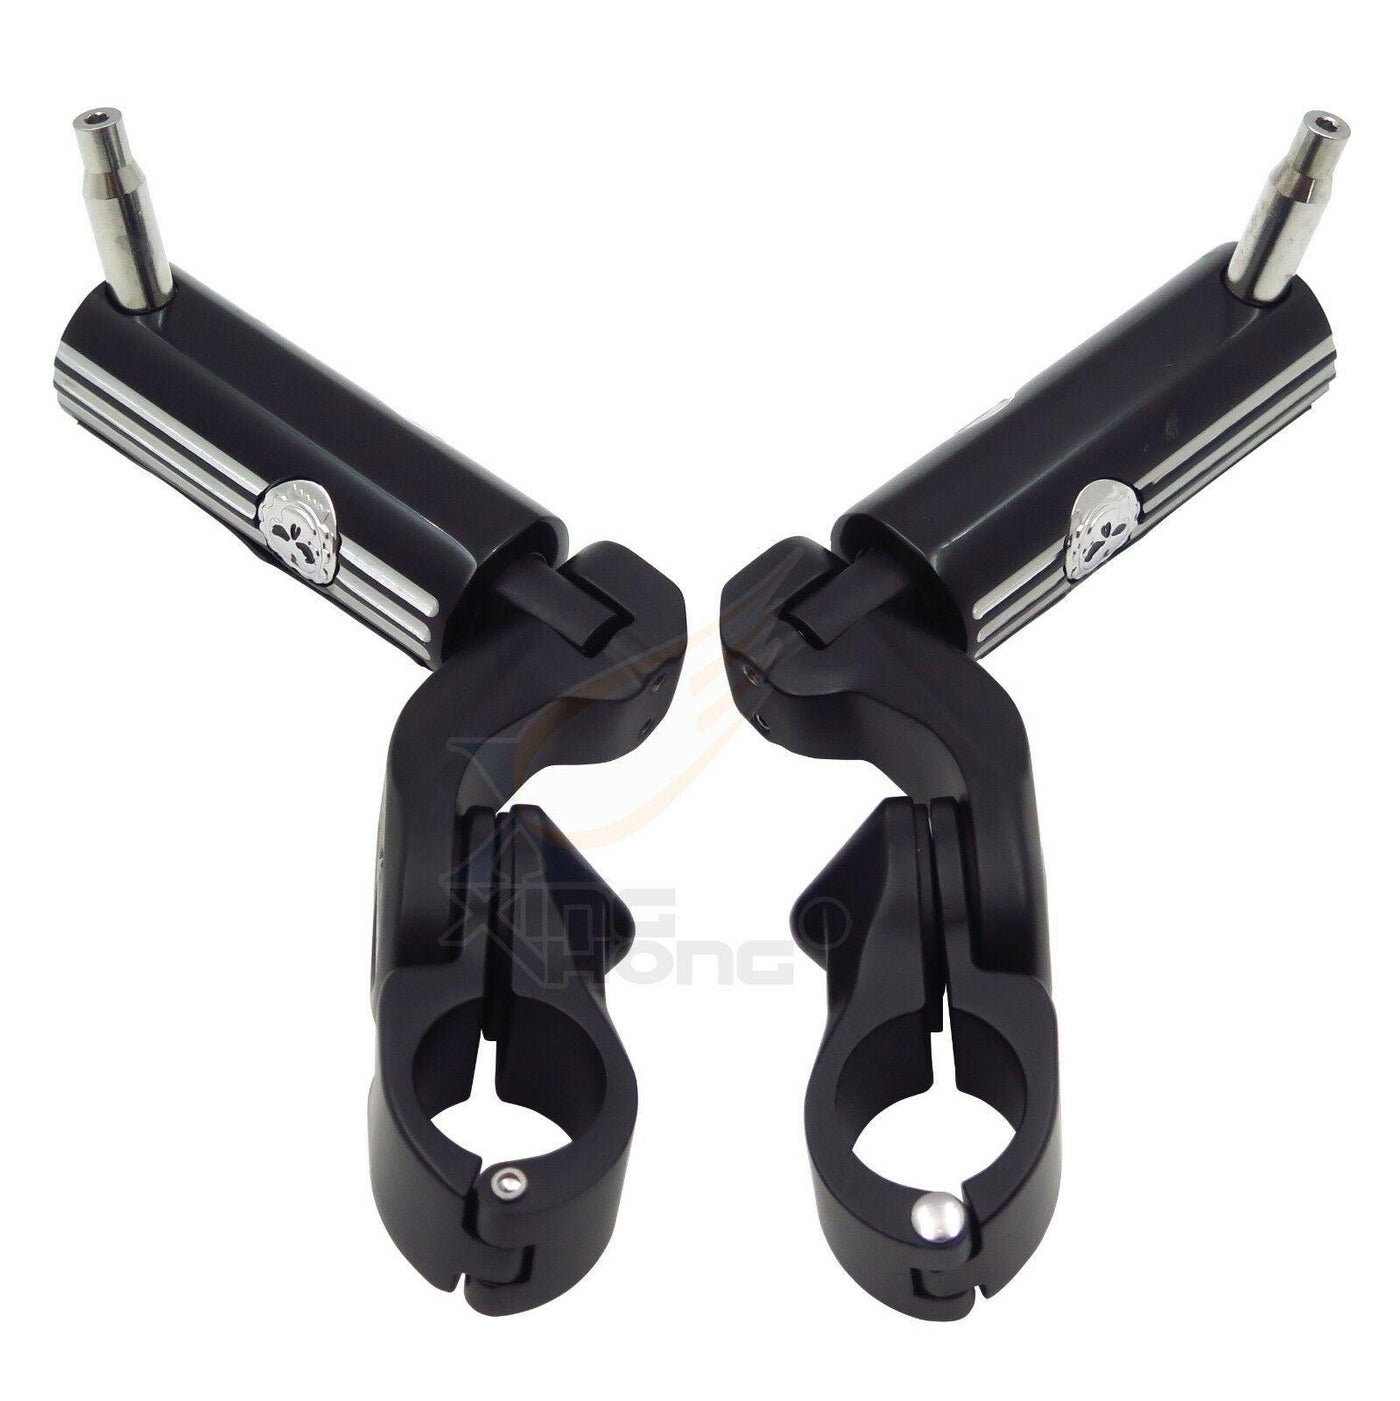 Foot Pegs w/1-1/4" Short Angled Highway Engine Guard For Harley V Rod Night - Moto Life Products